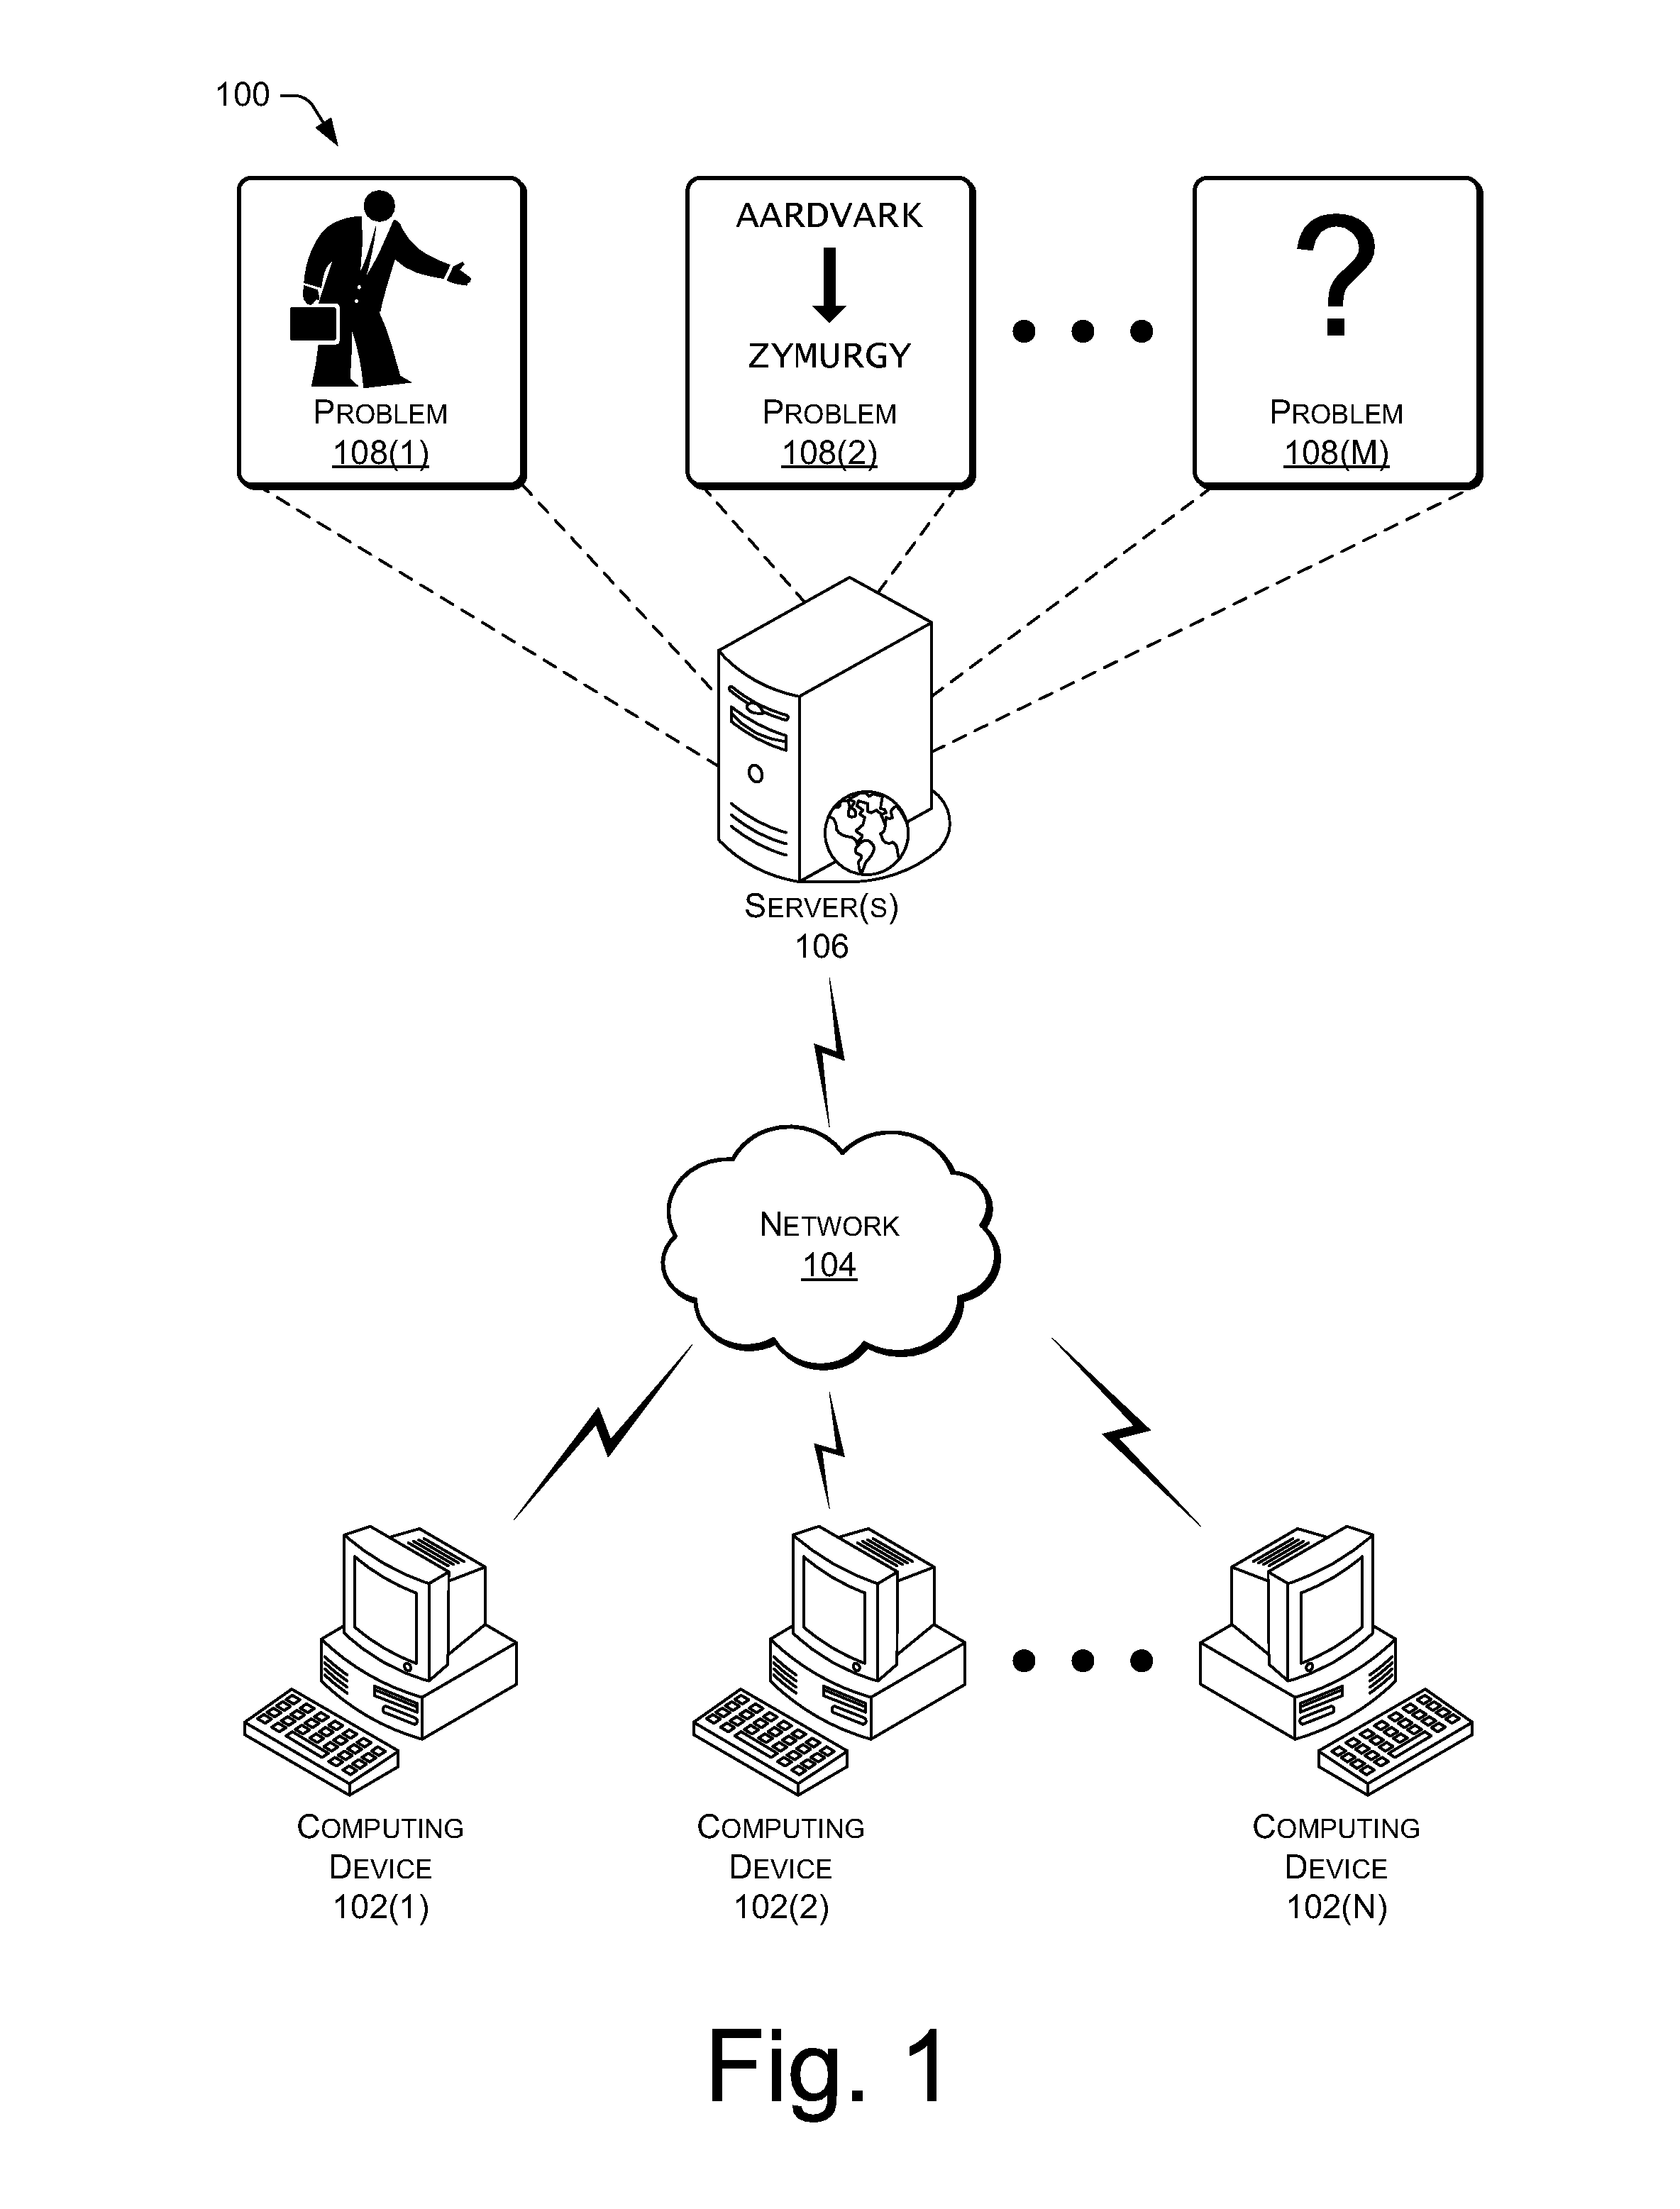 Data anonymity and separation for user computation